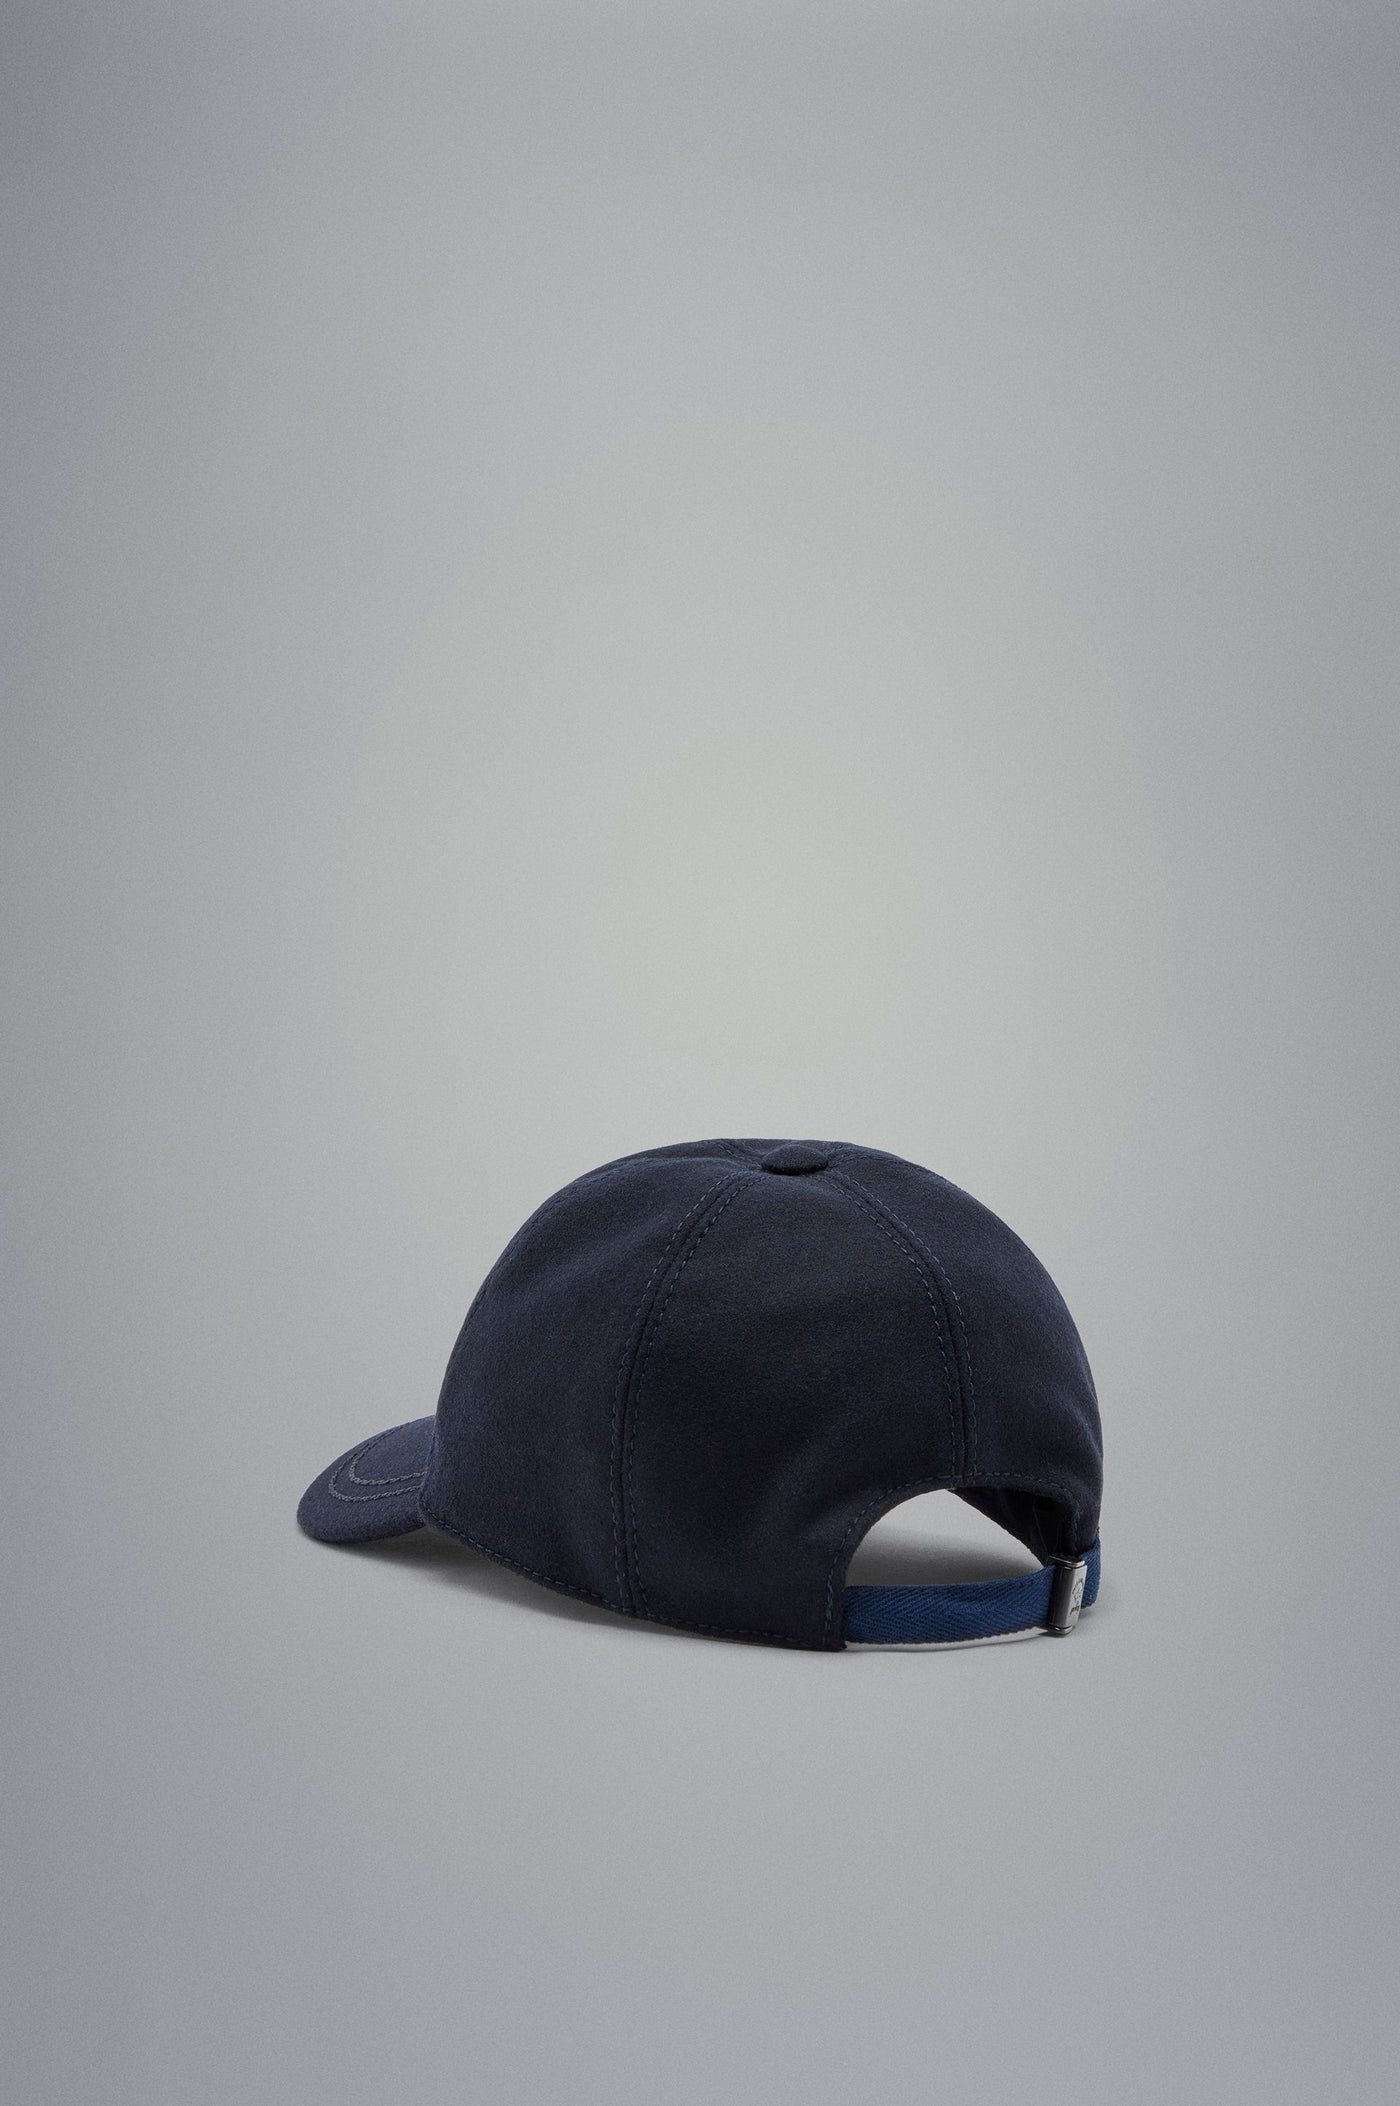 Paul & Shark Wool Hat with Iconic Badge | Navy